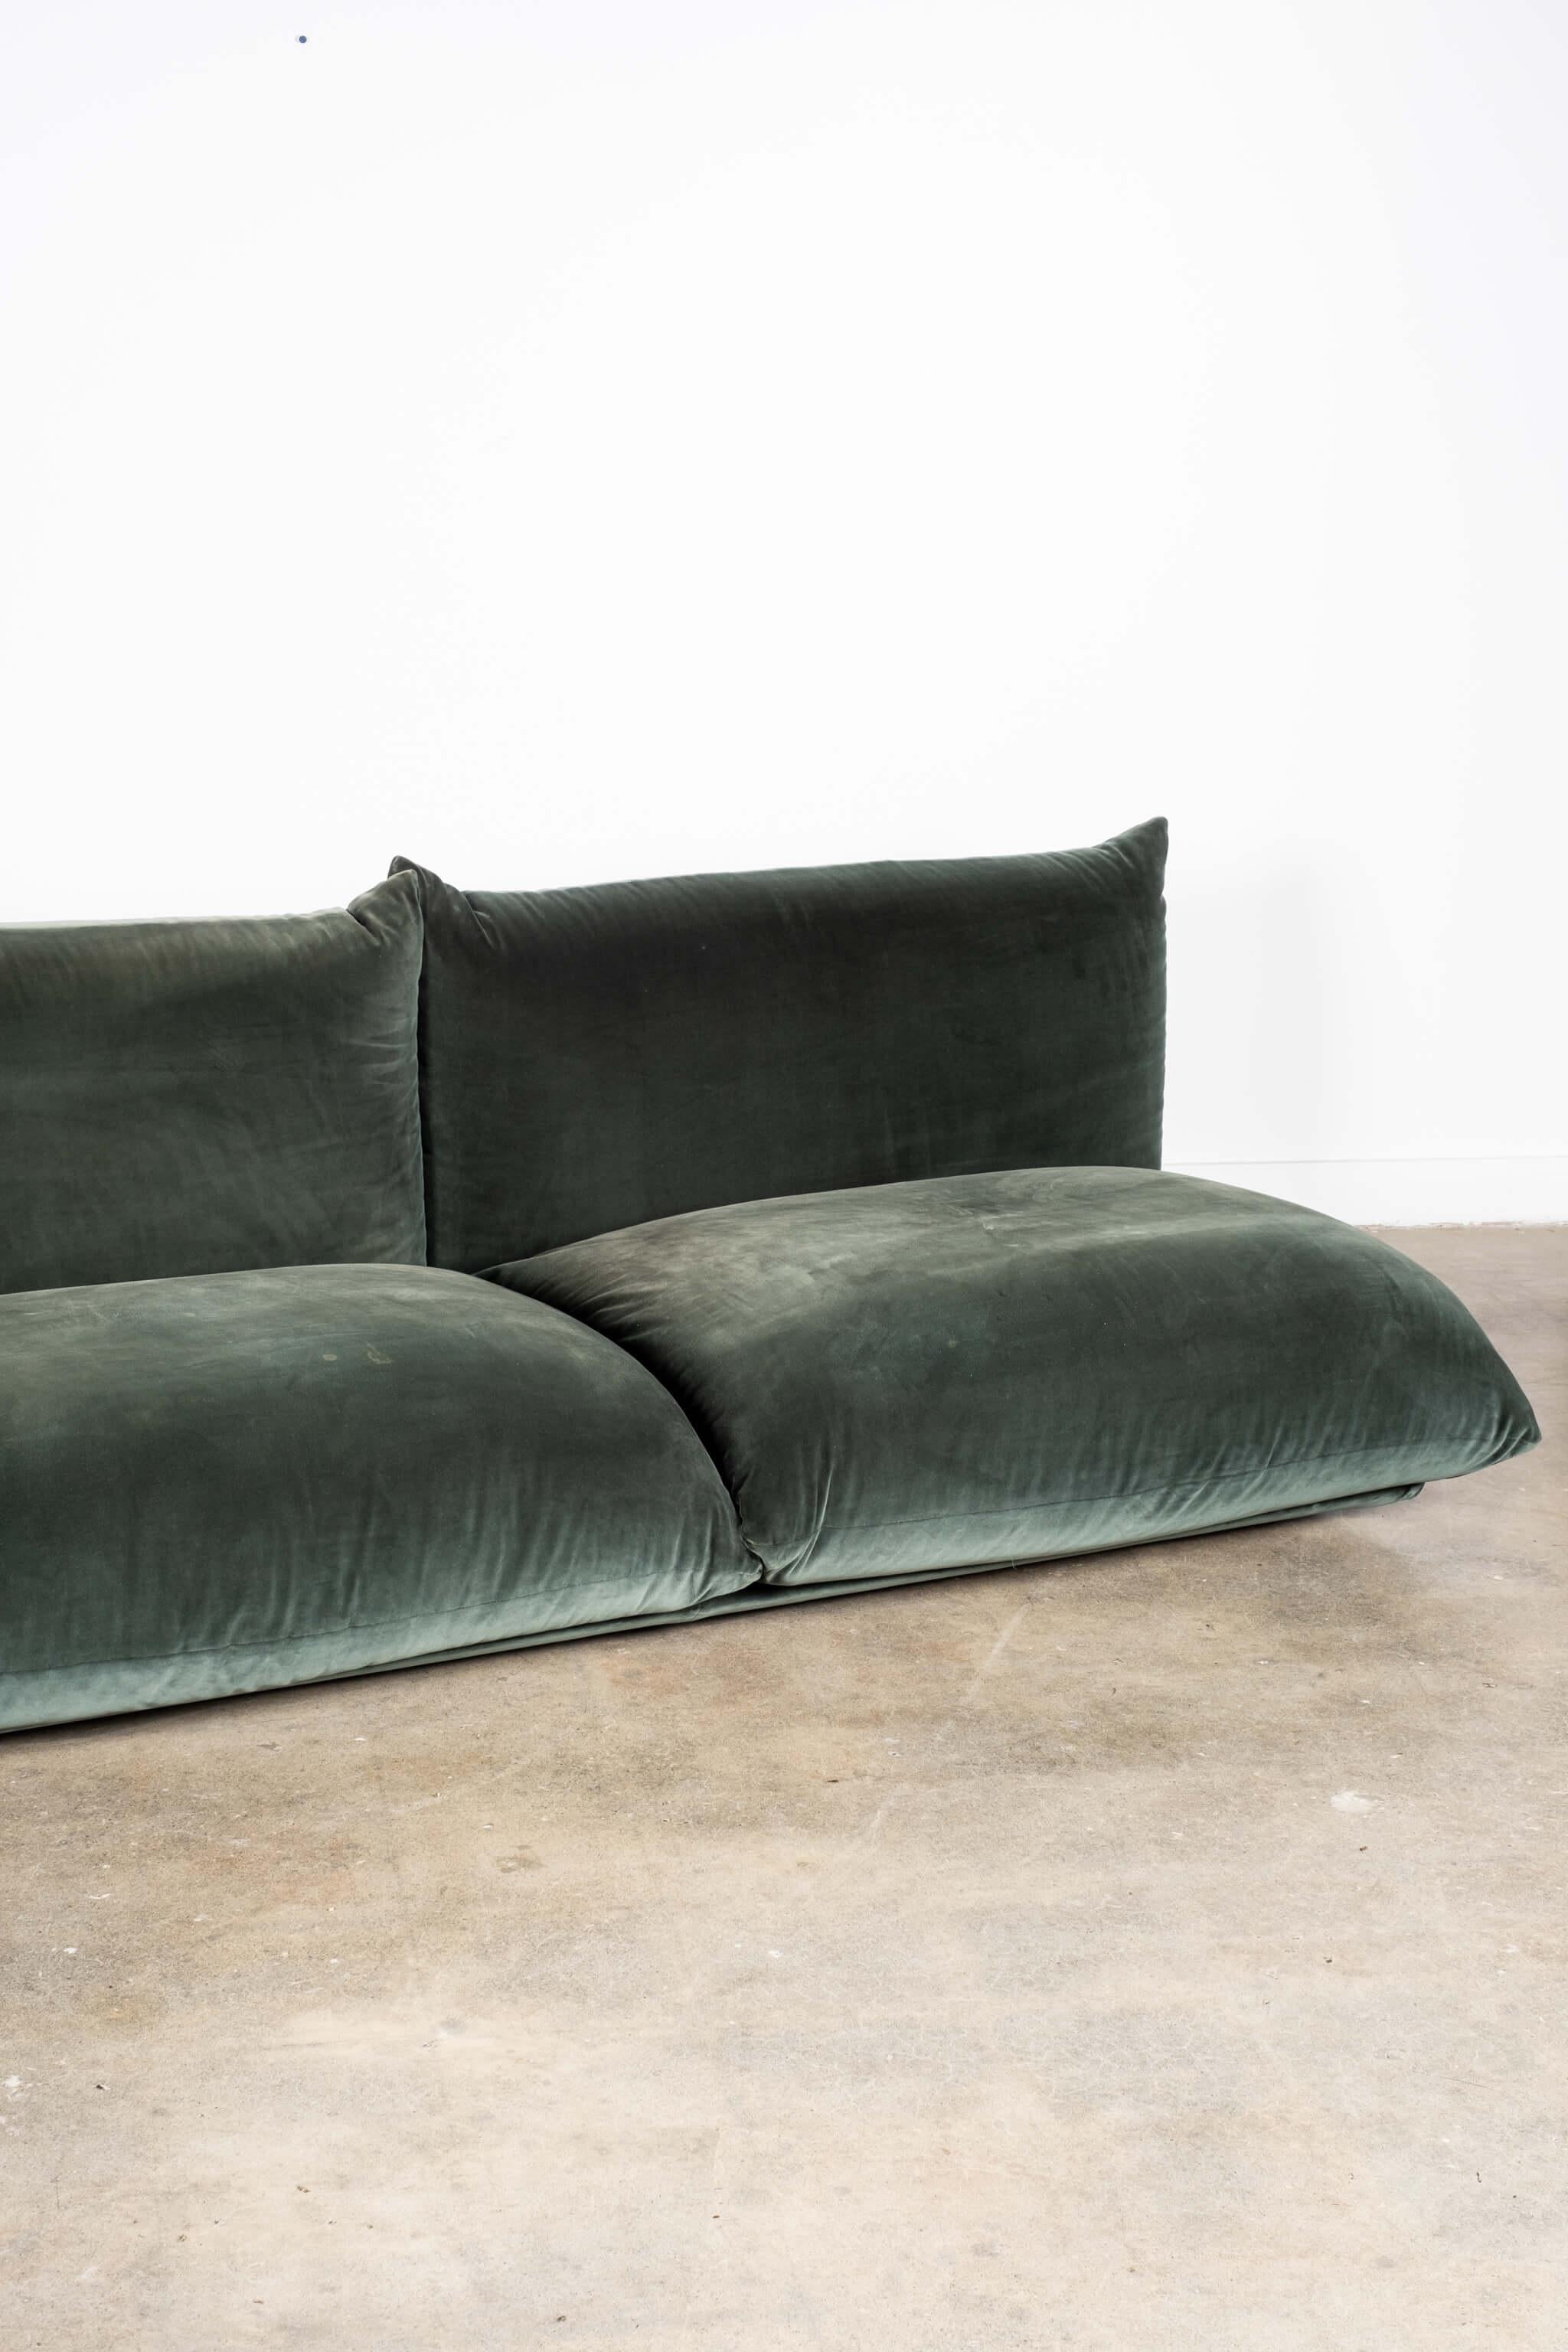 Late 20th Century Marenco 1 Arm 2-Seater Sofa in Green Velvet by Mario Marenco For Sale